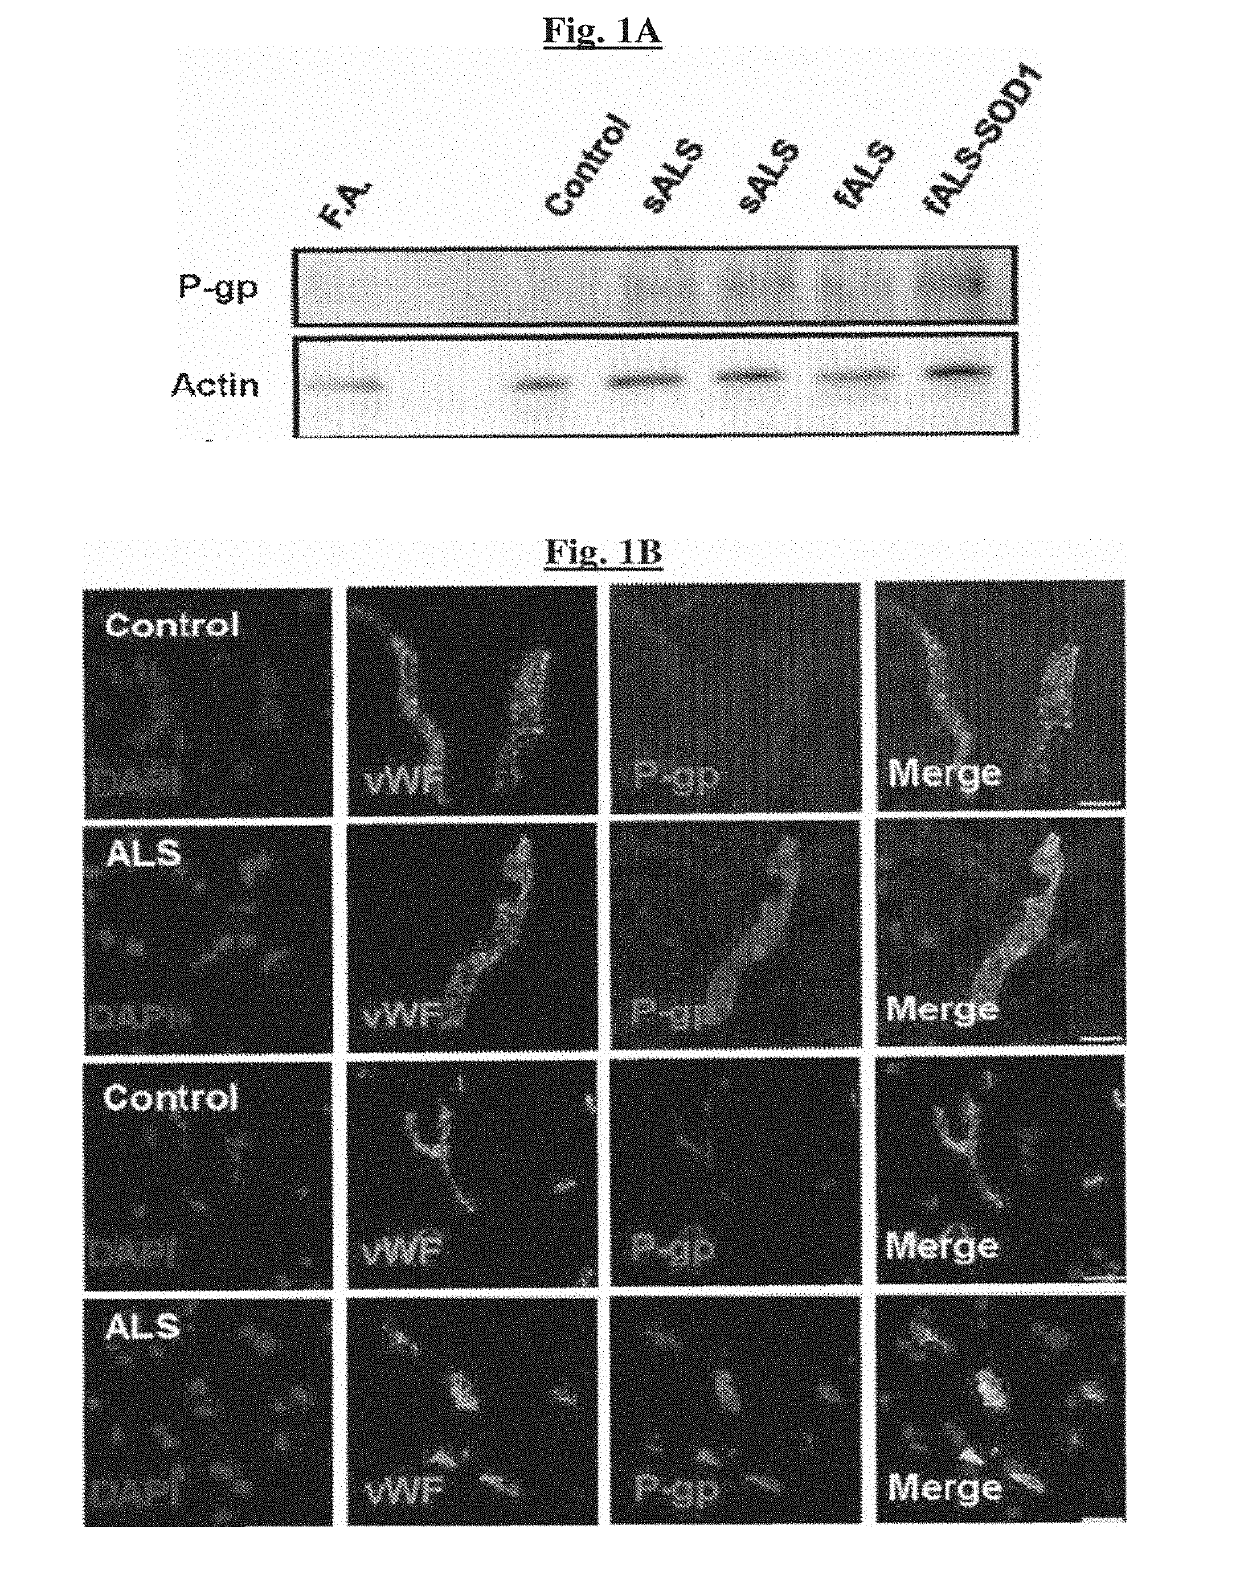 Novel methods of treating a neurodegenerative disease in a mammal in need thereof